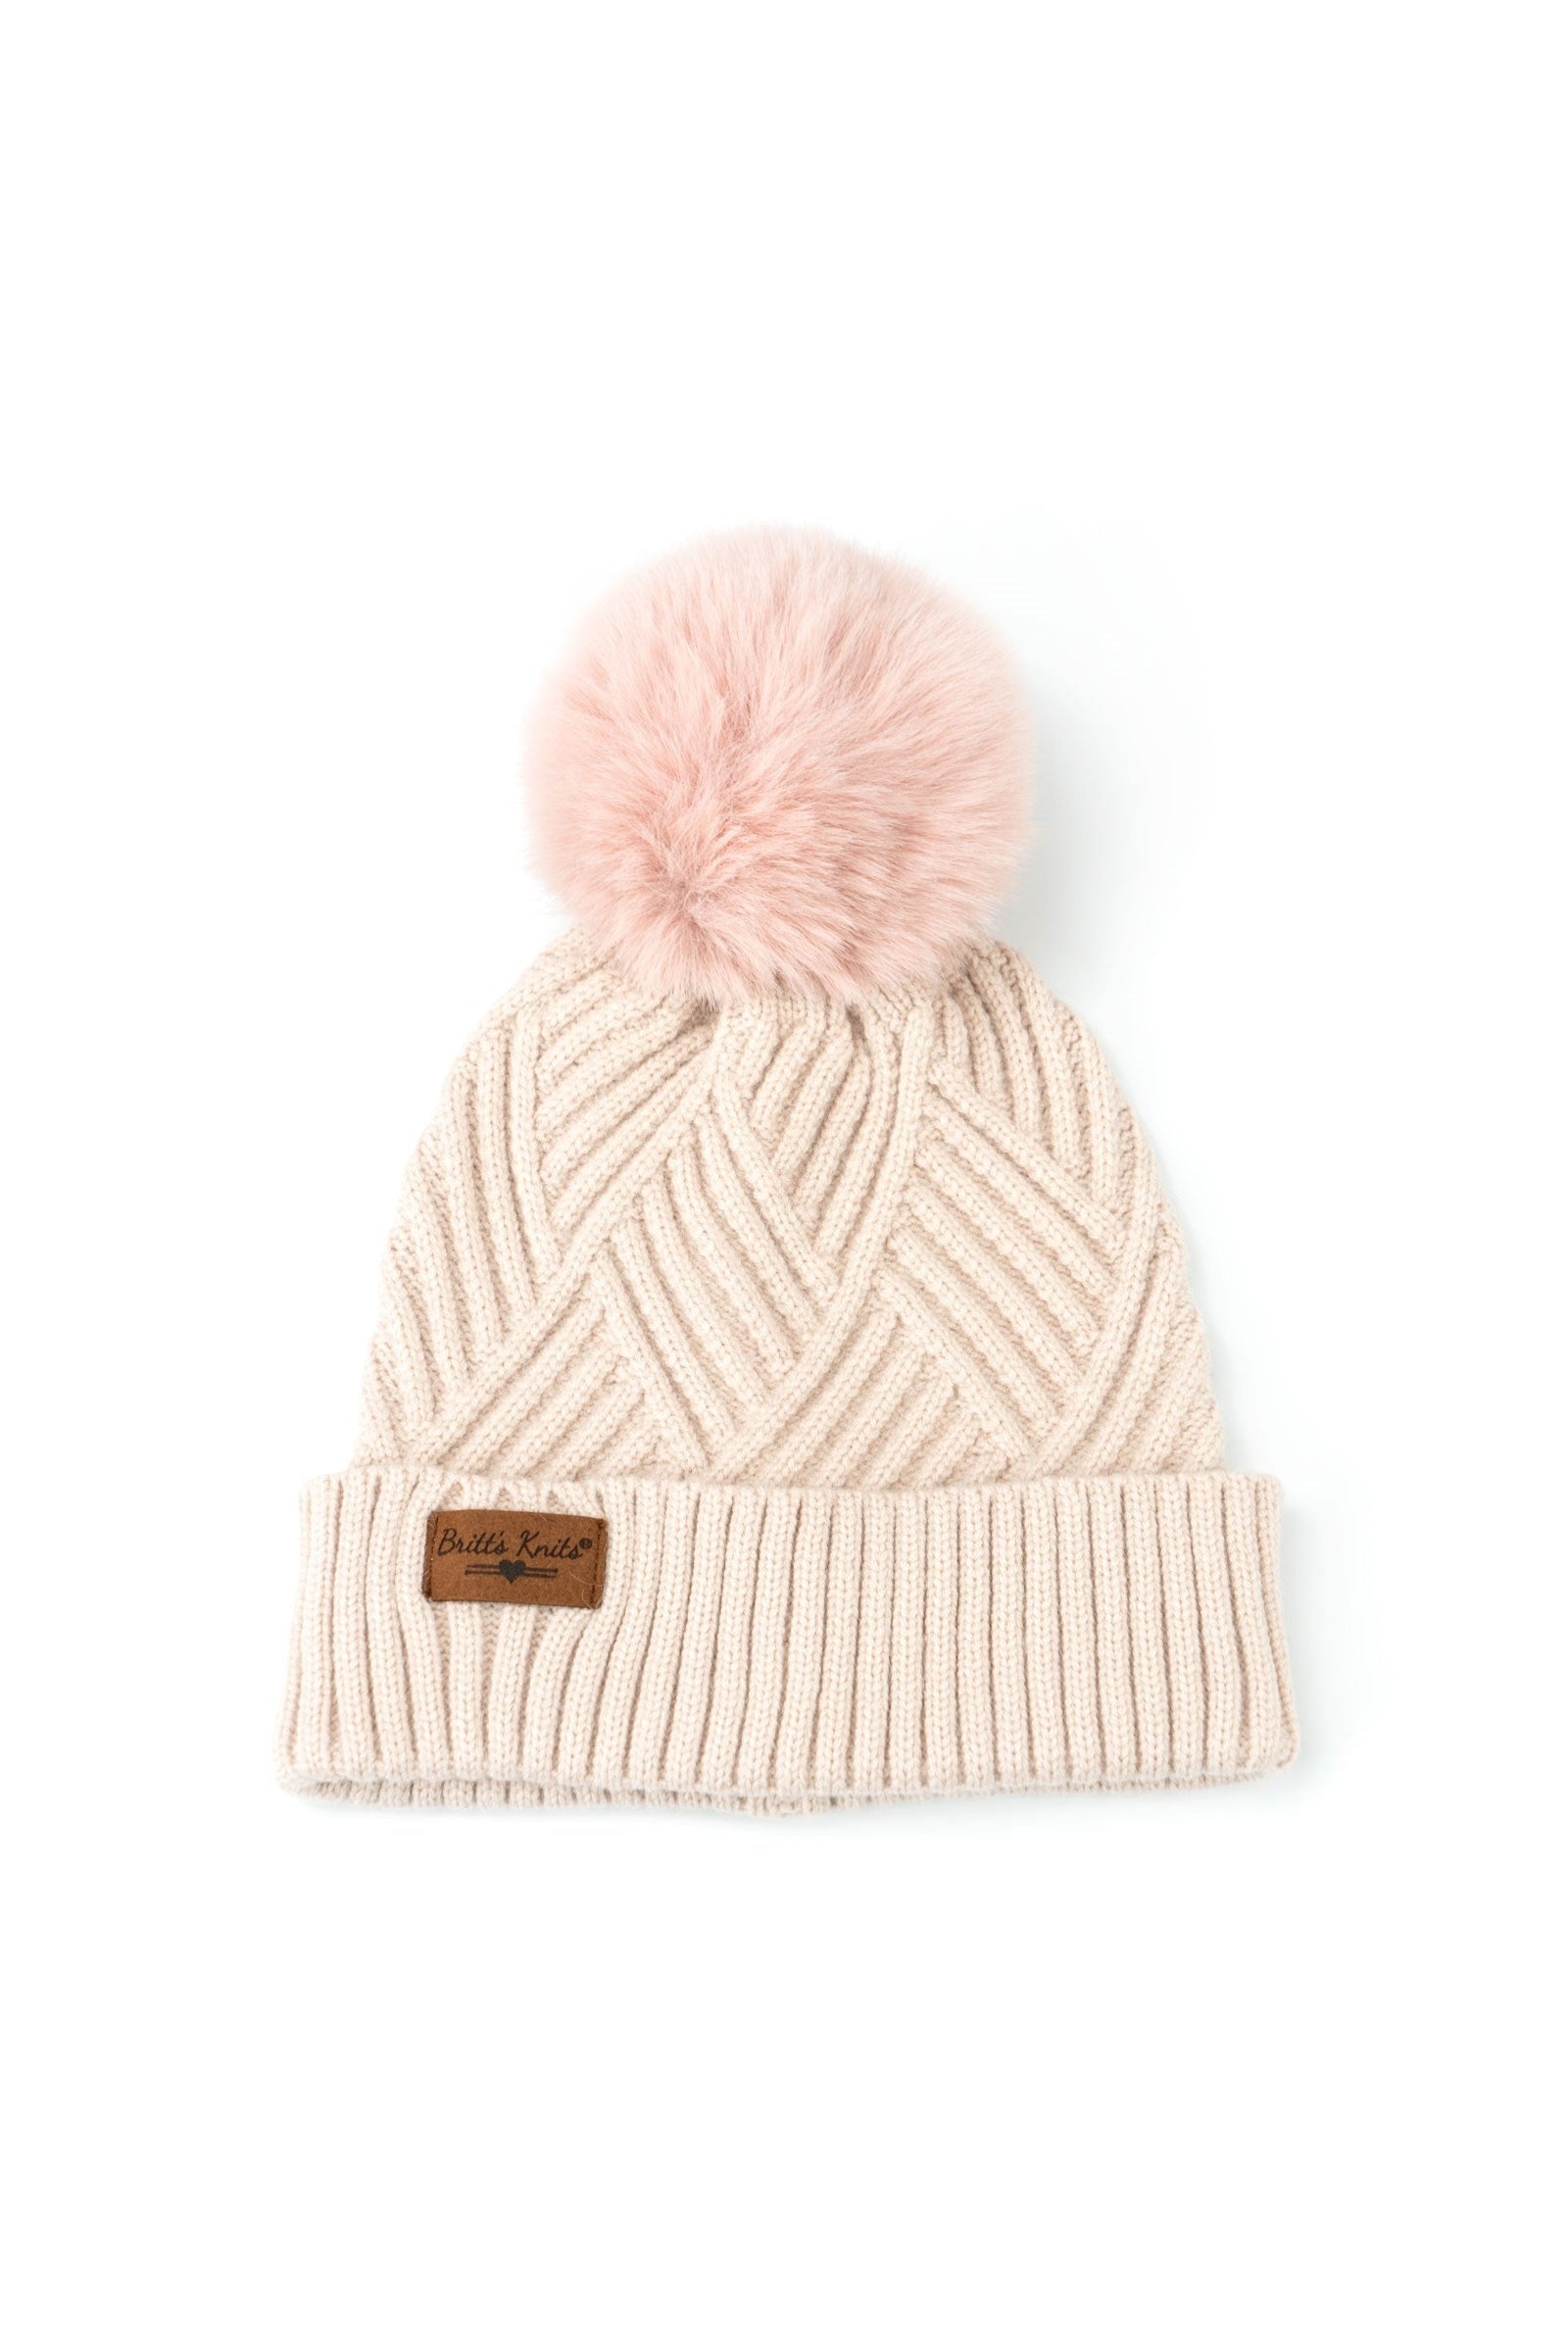 Shop Super Poof Pom Hat-Winter Hat at Ruby Joy Boutique, a Women's Clothing Store in Pickerington, Ohio